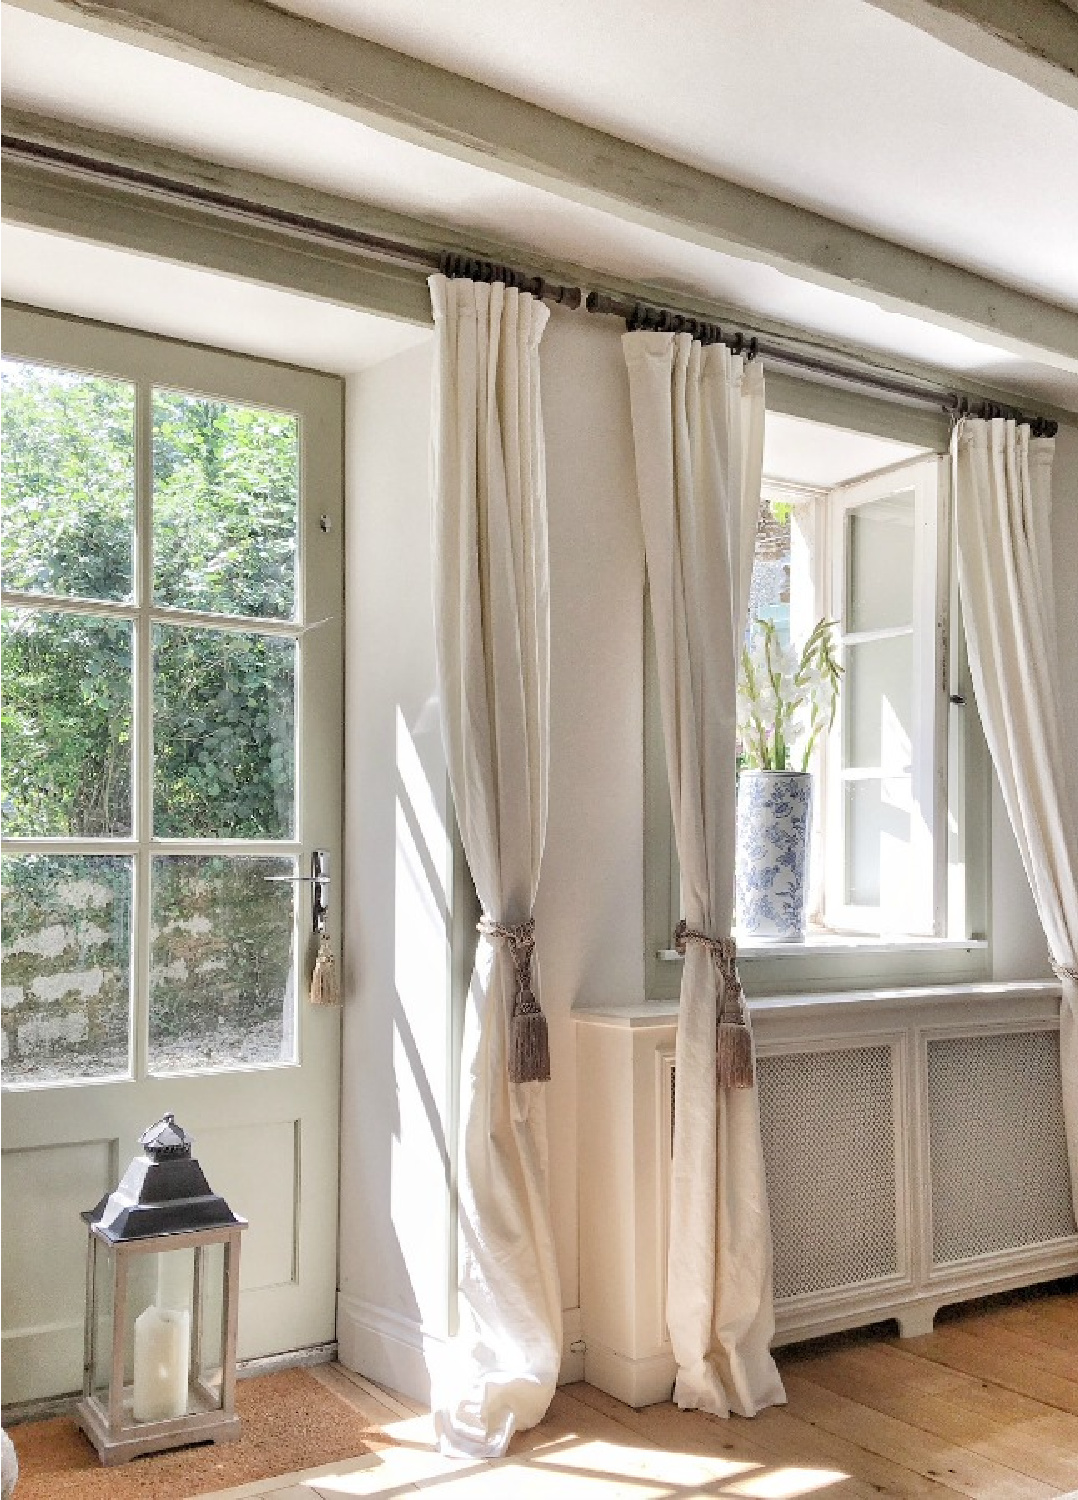 Pale Belgian linen curtains in a charming French country living room in France - Vivi et Margot.